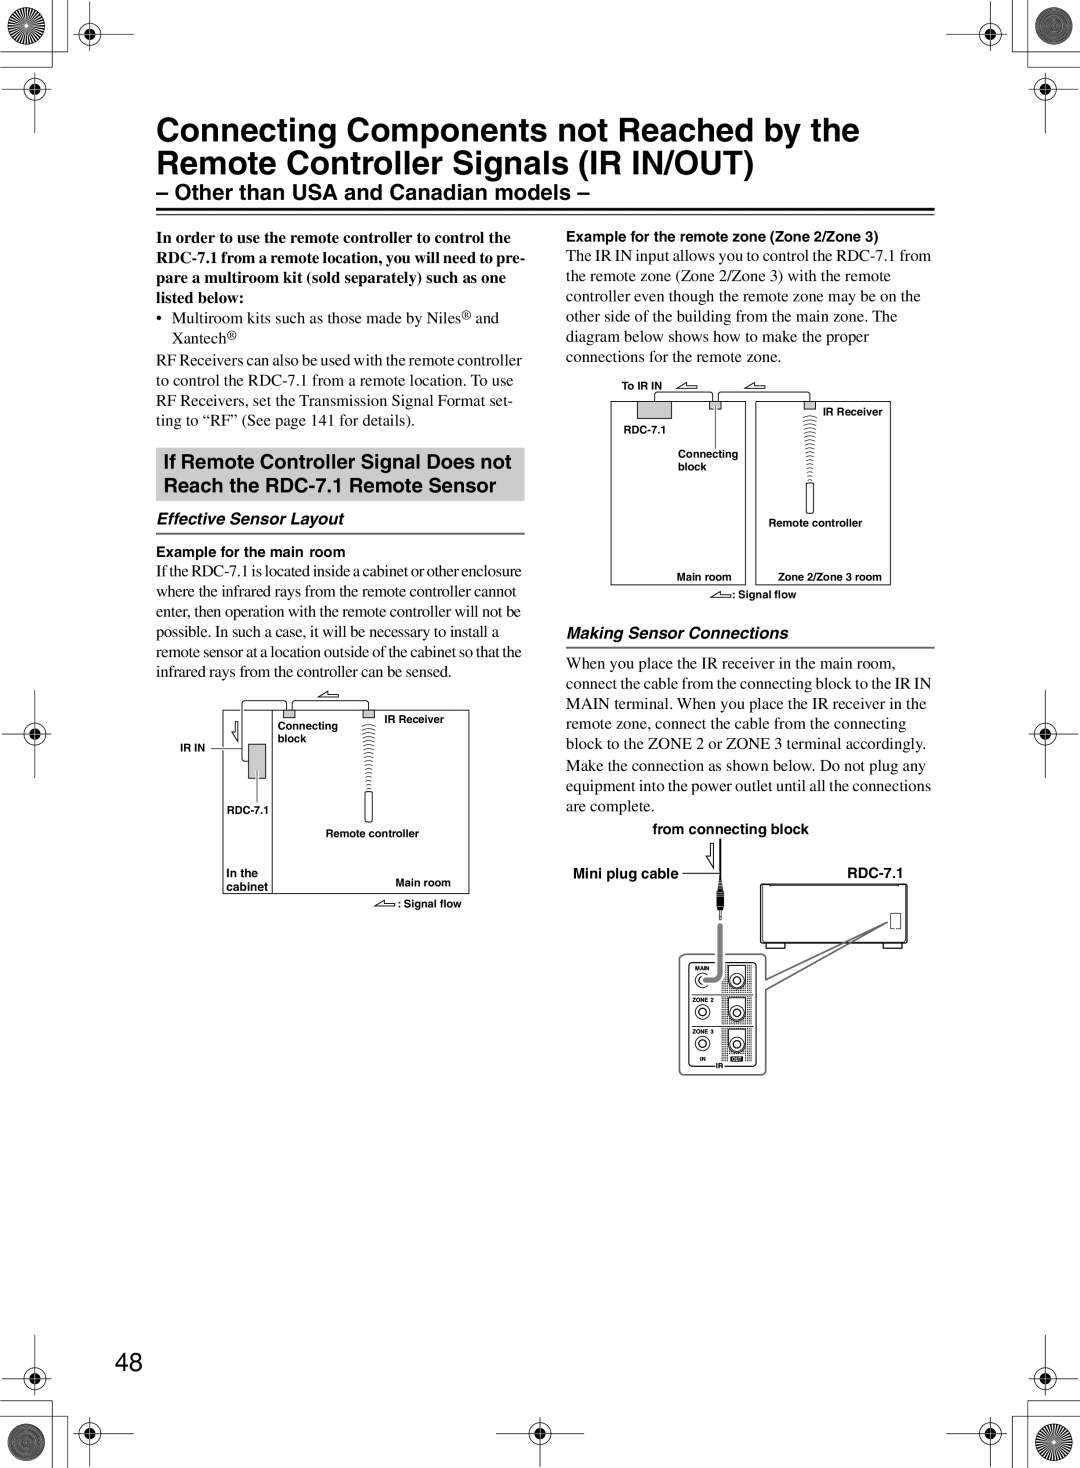 Integra RDC-7.1 instruction manual Other than USA and Canadian models, Making Sensor Connections, Effective Sensor Layout 